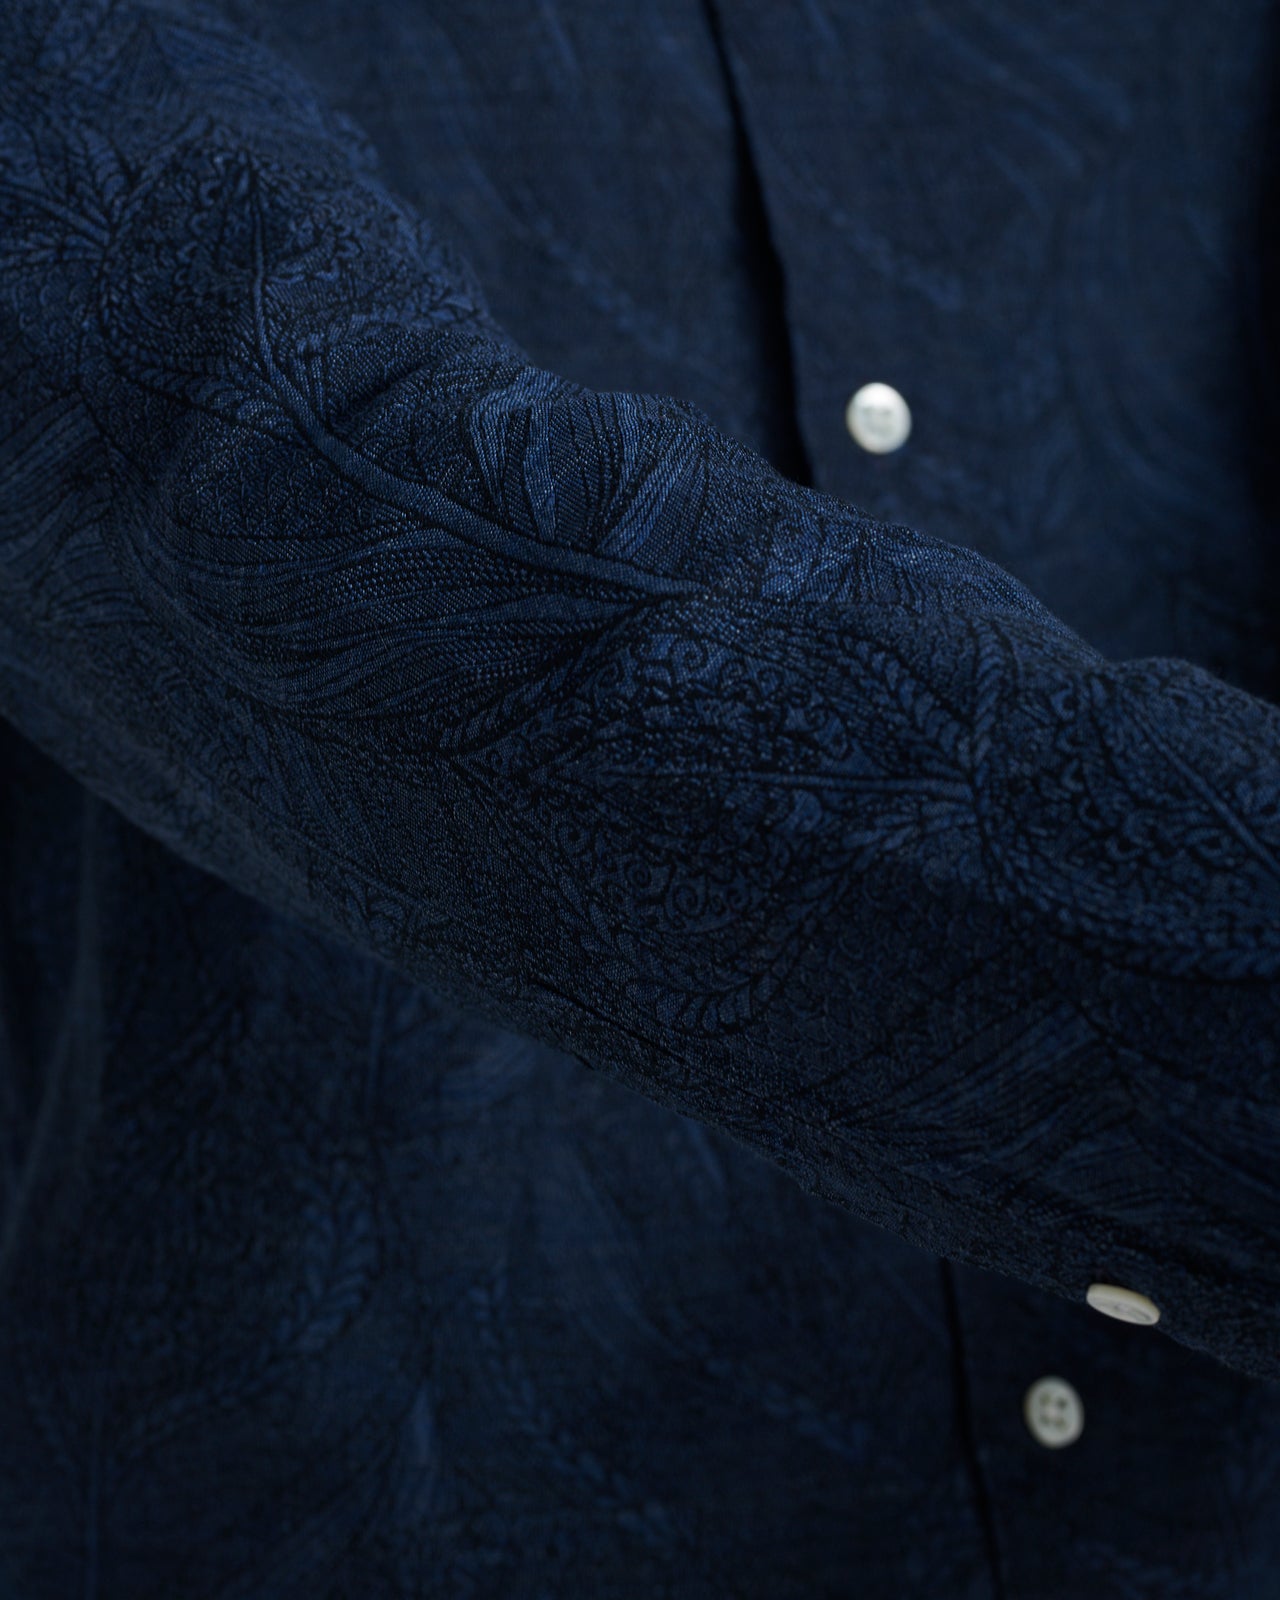 Feel Good Shirt in a Navy Blue Jacquard Italian Cotton and Linen by the Historical mill Leggiuno